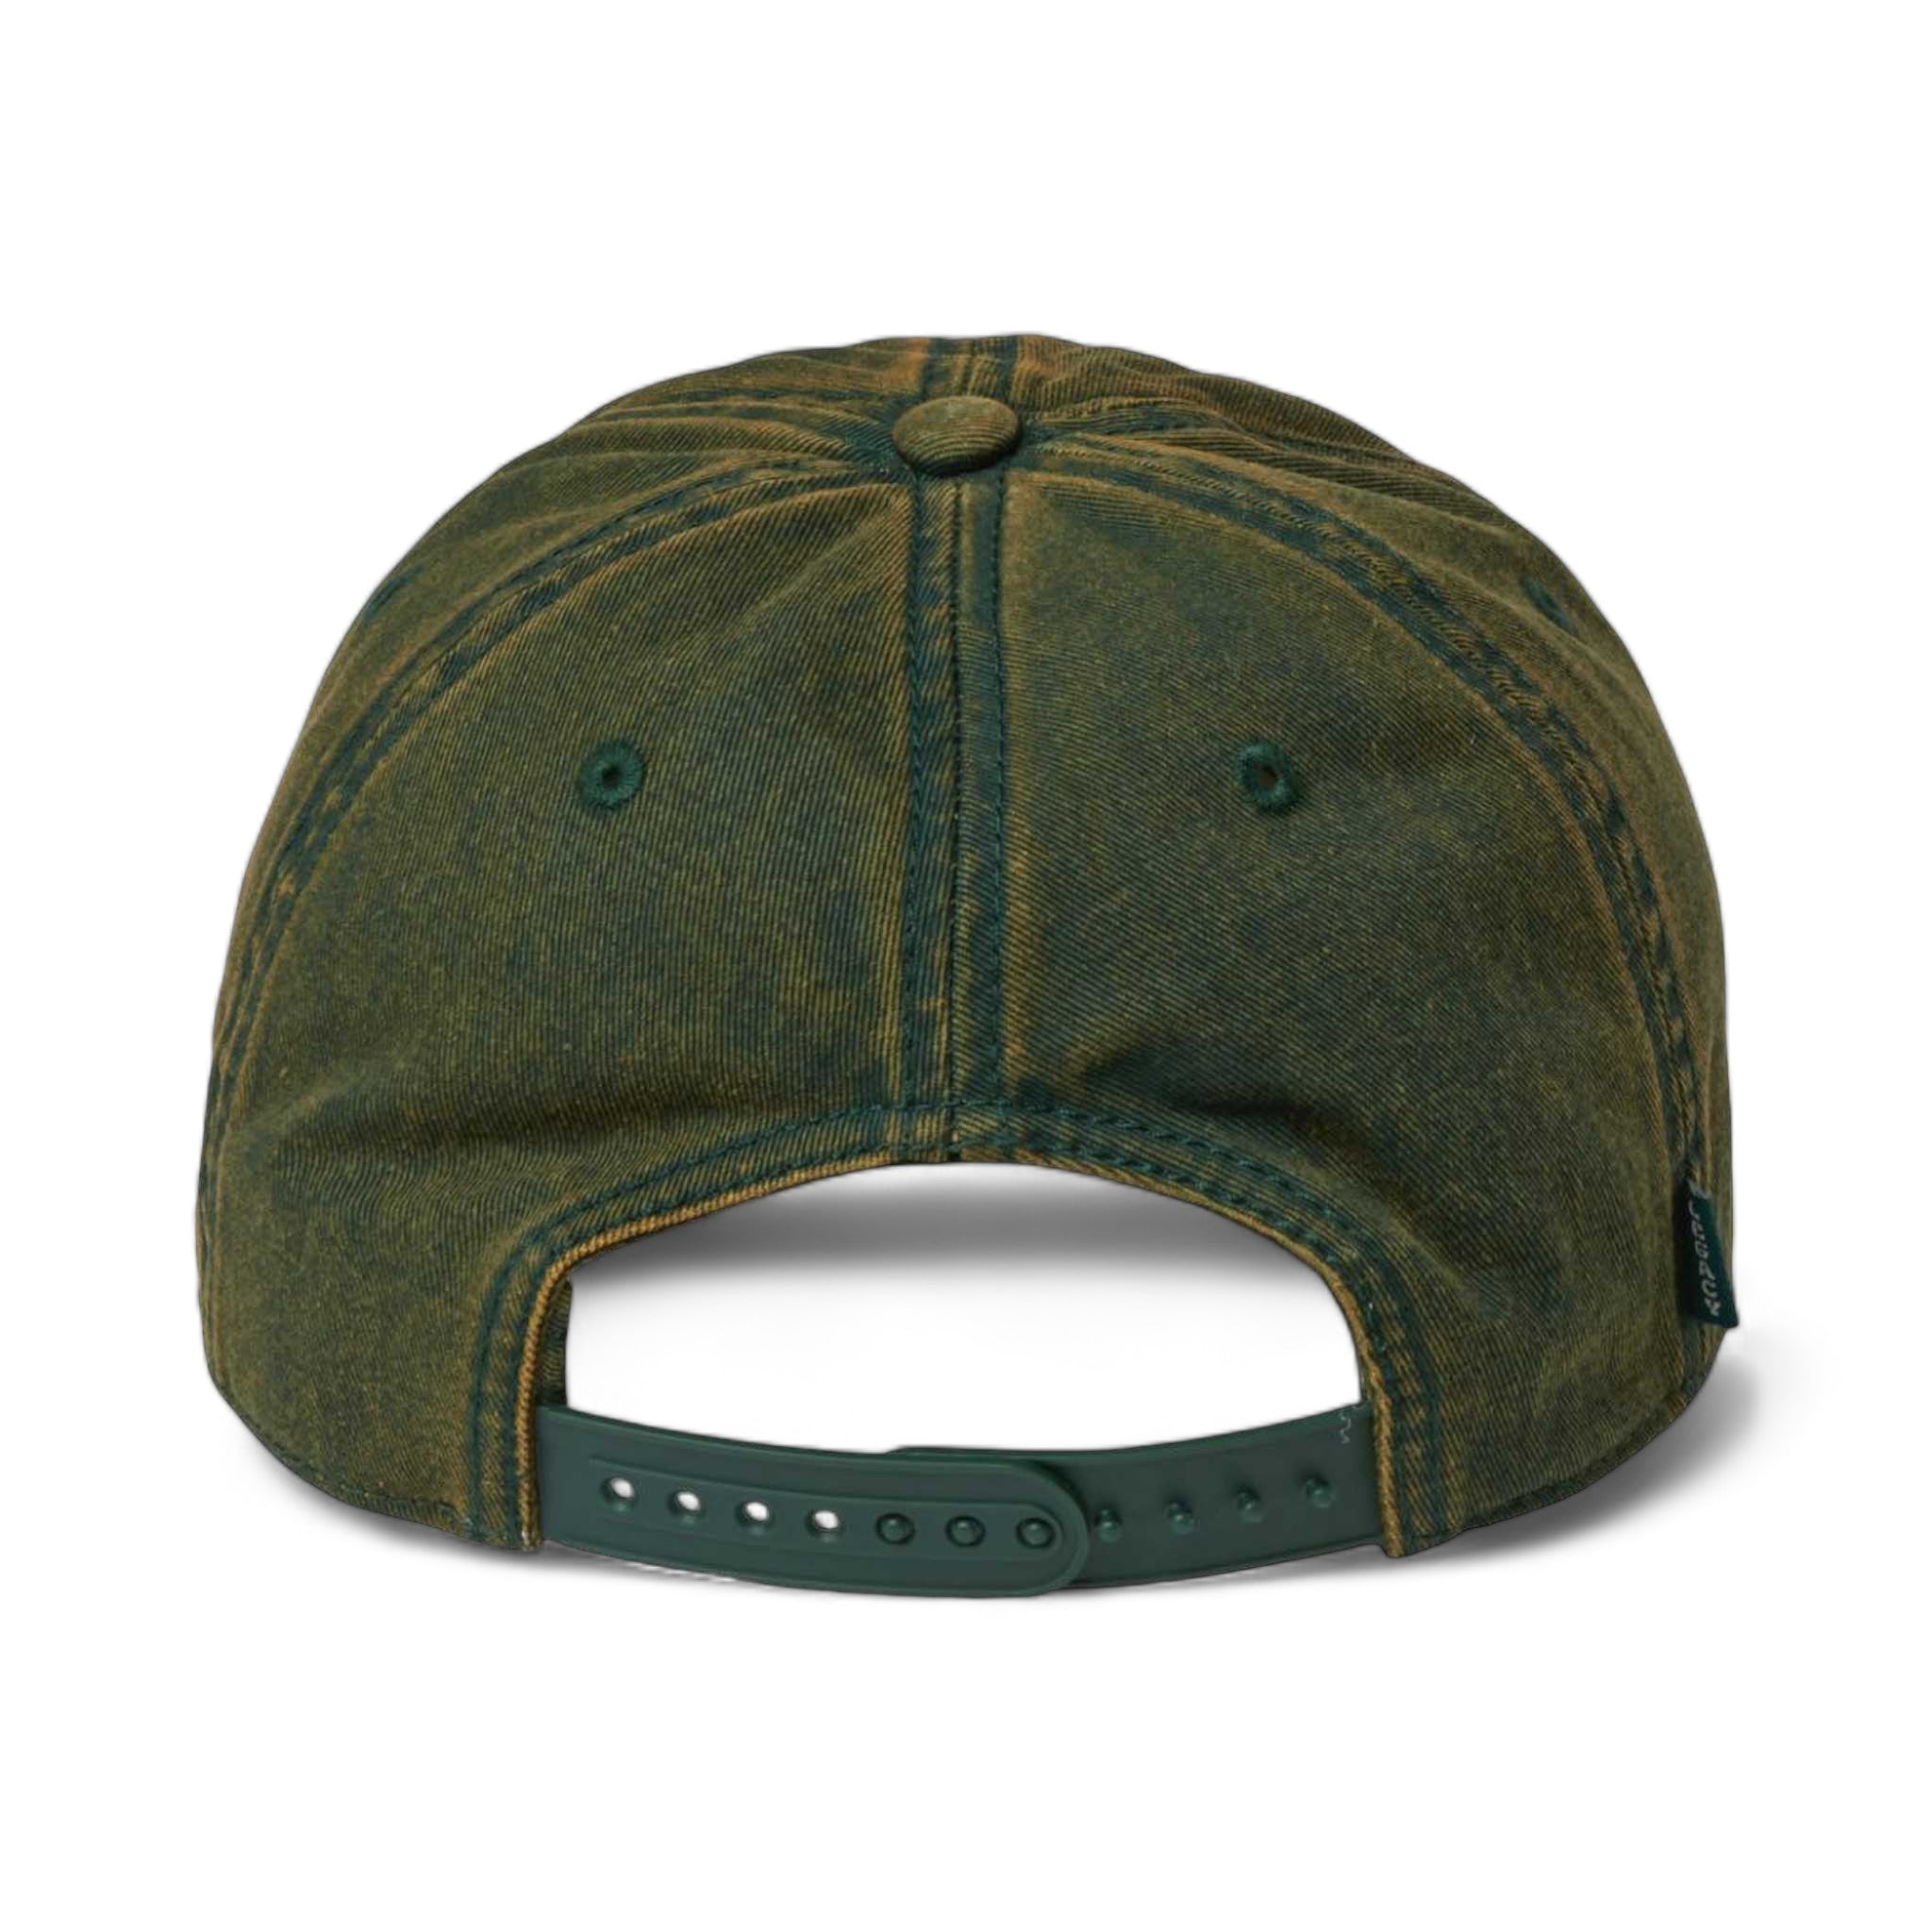 Back view of LEGACY OFAST custom hat in green